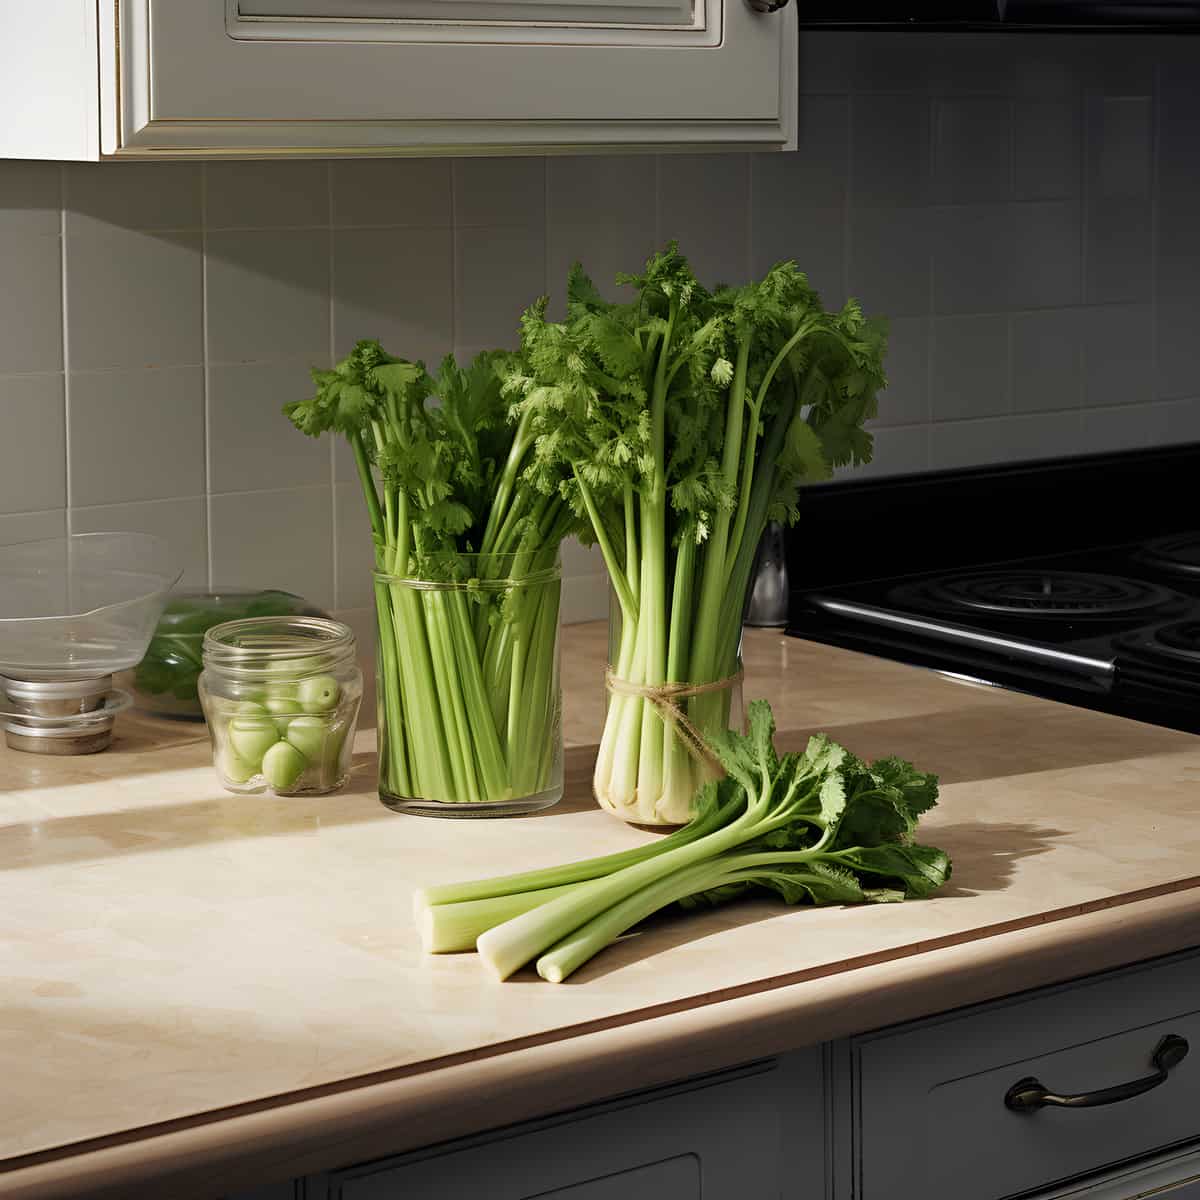 Celery on a kitchen counter